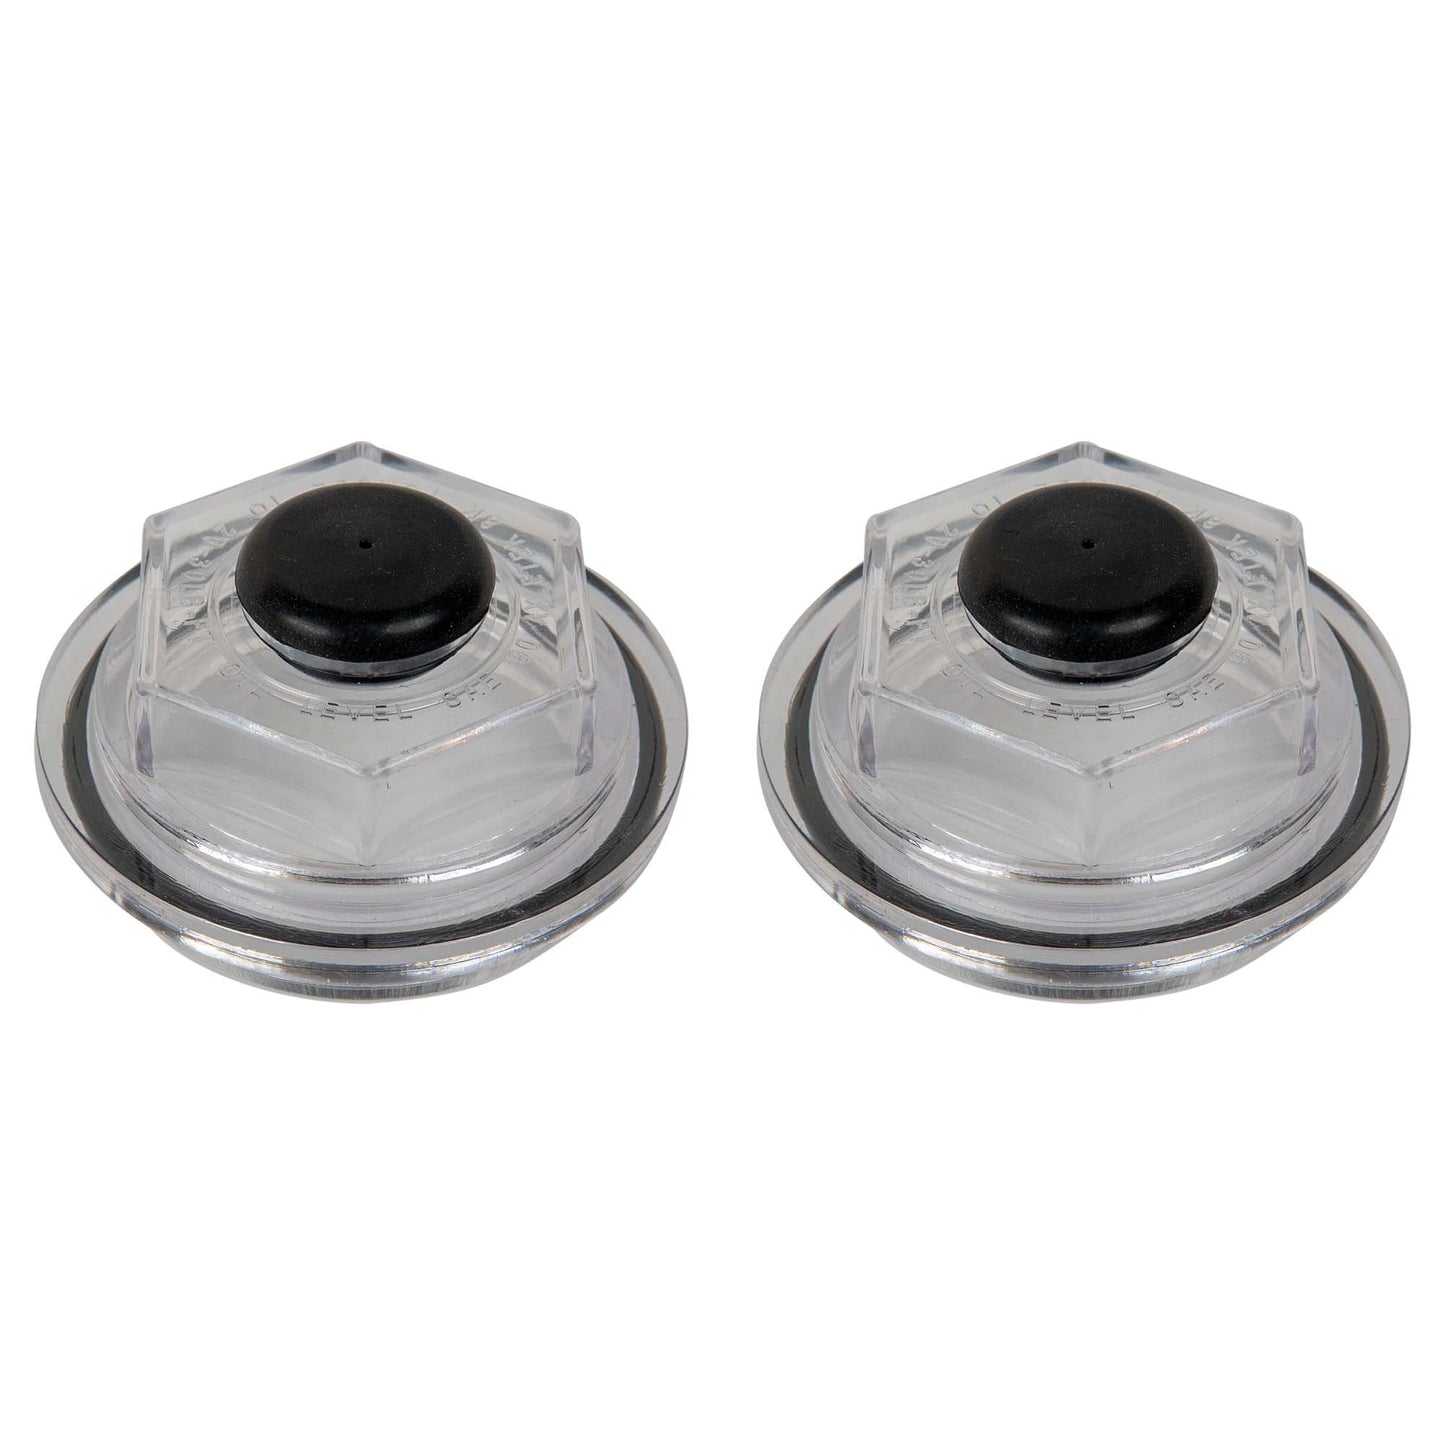 8k Trailer Axle Grease Cap Assembly - 8000 lb Capacity - Screw In - (Lippert Axle Application)